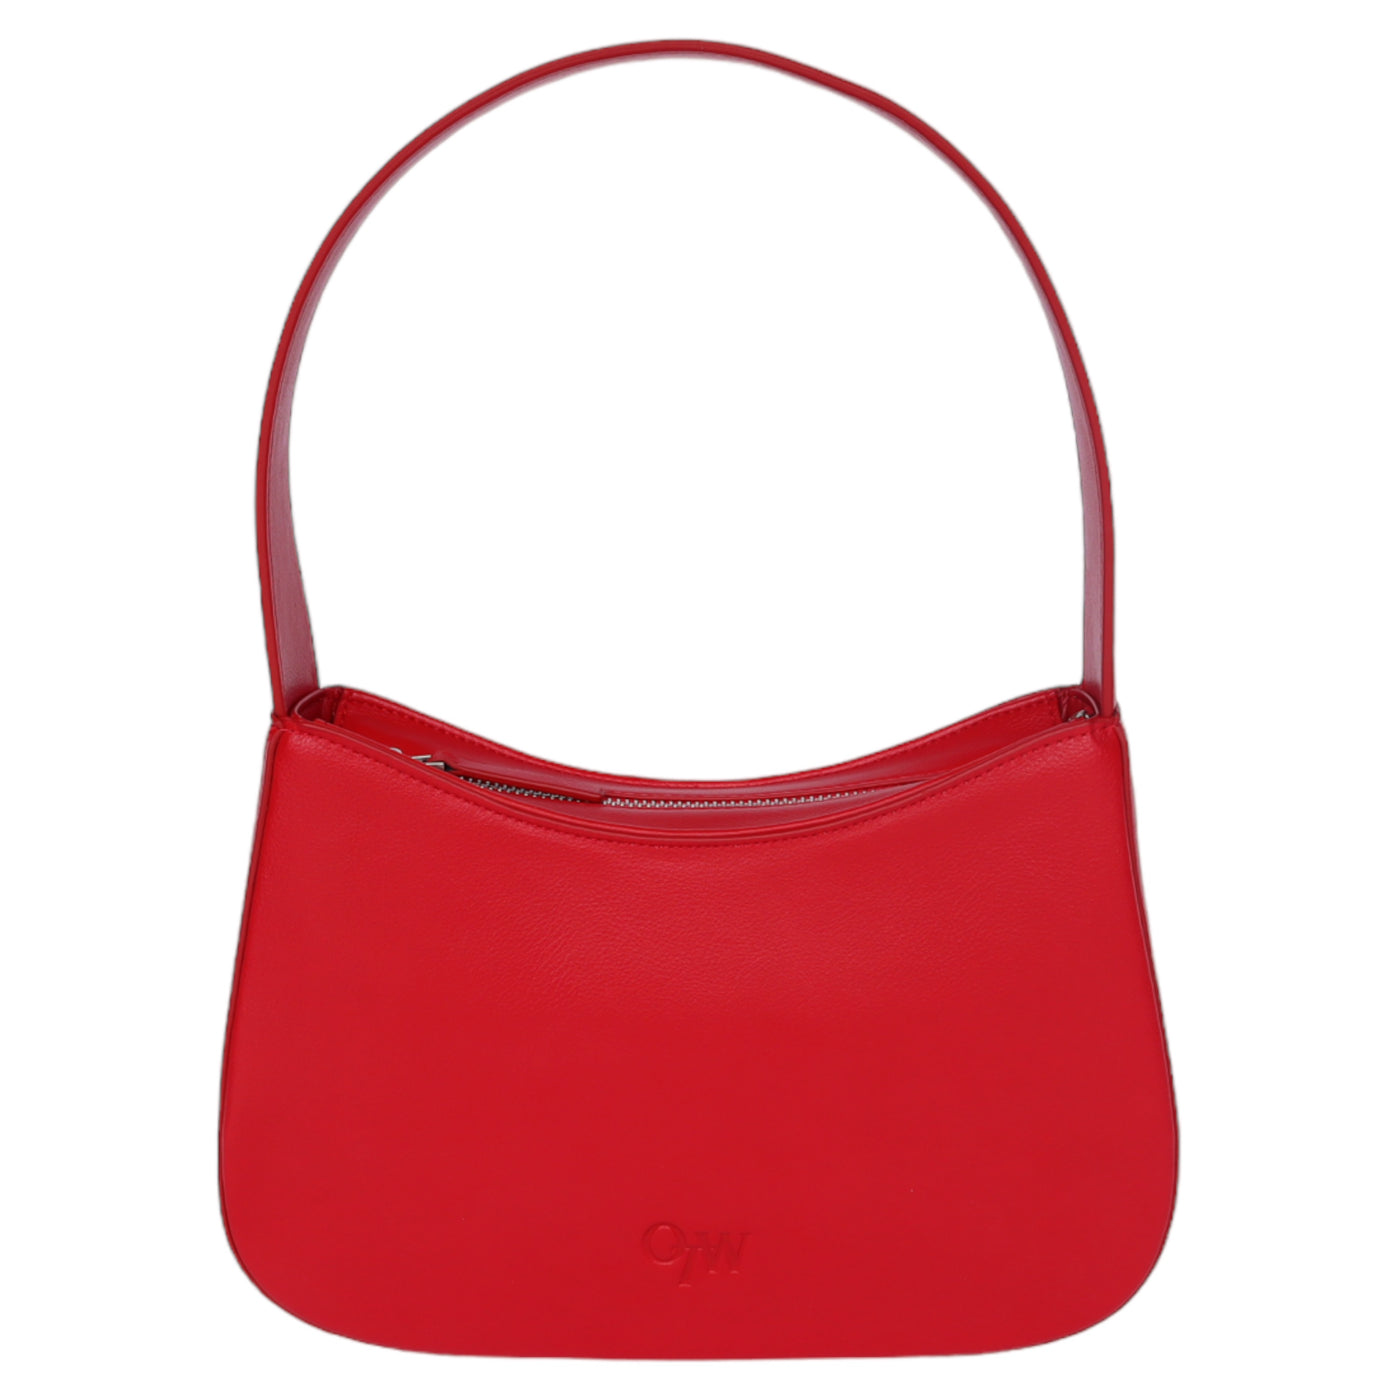 The Zona Bag Cherry Red